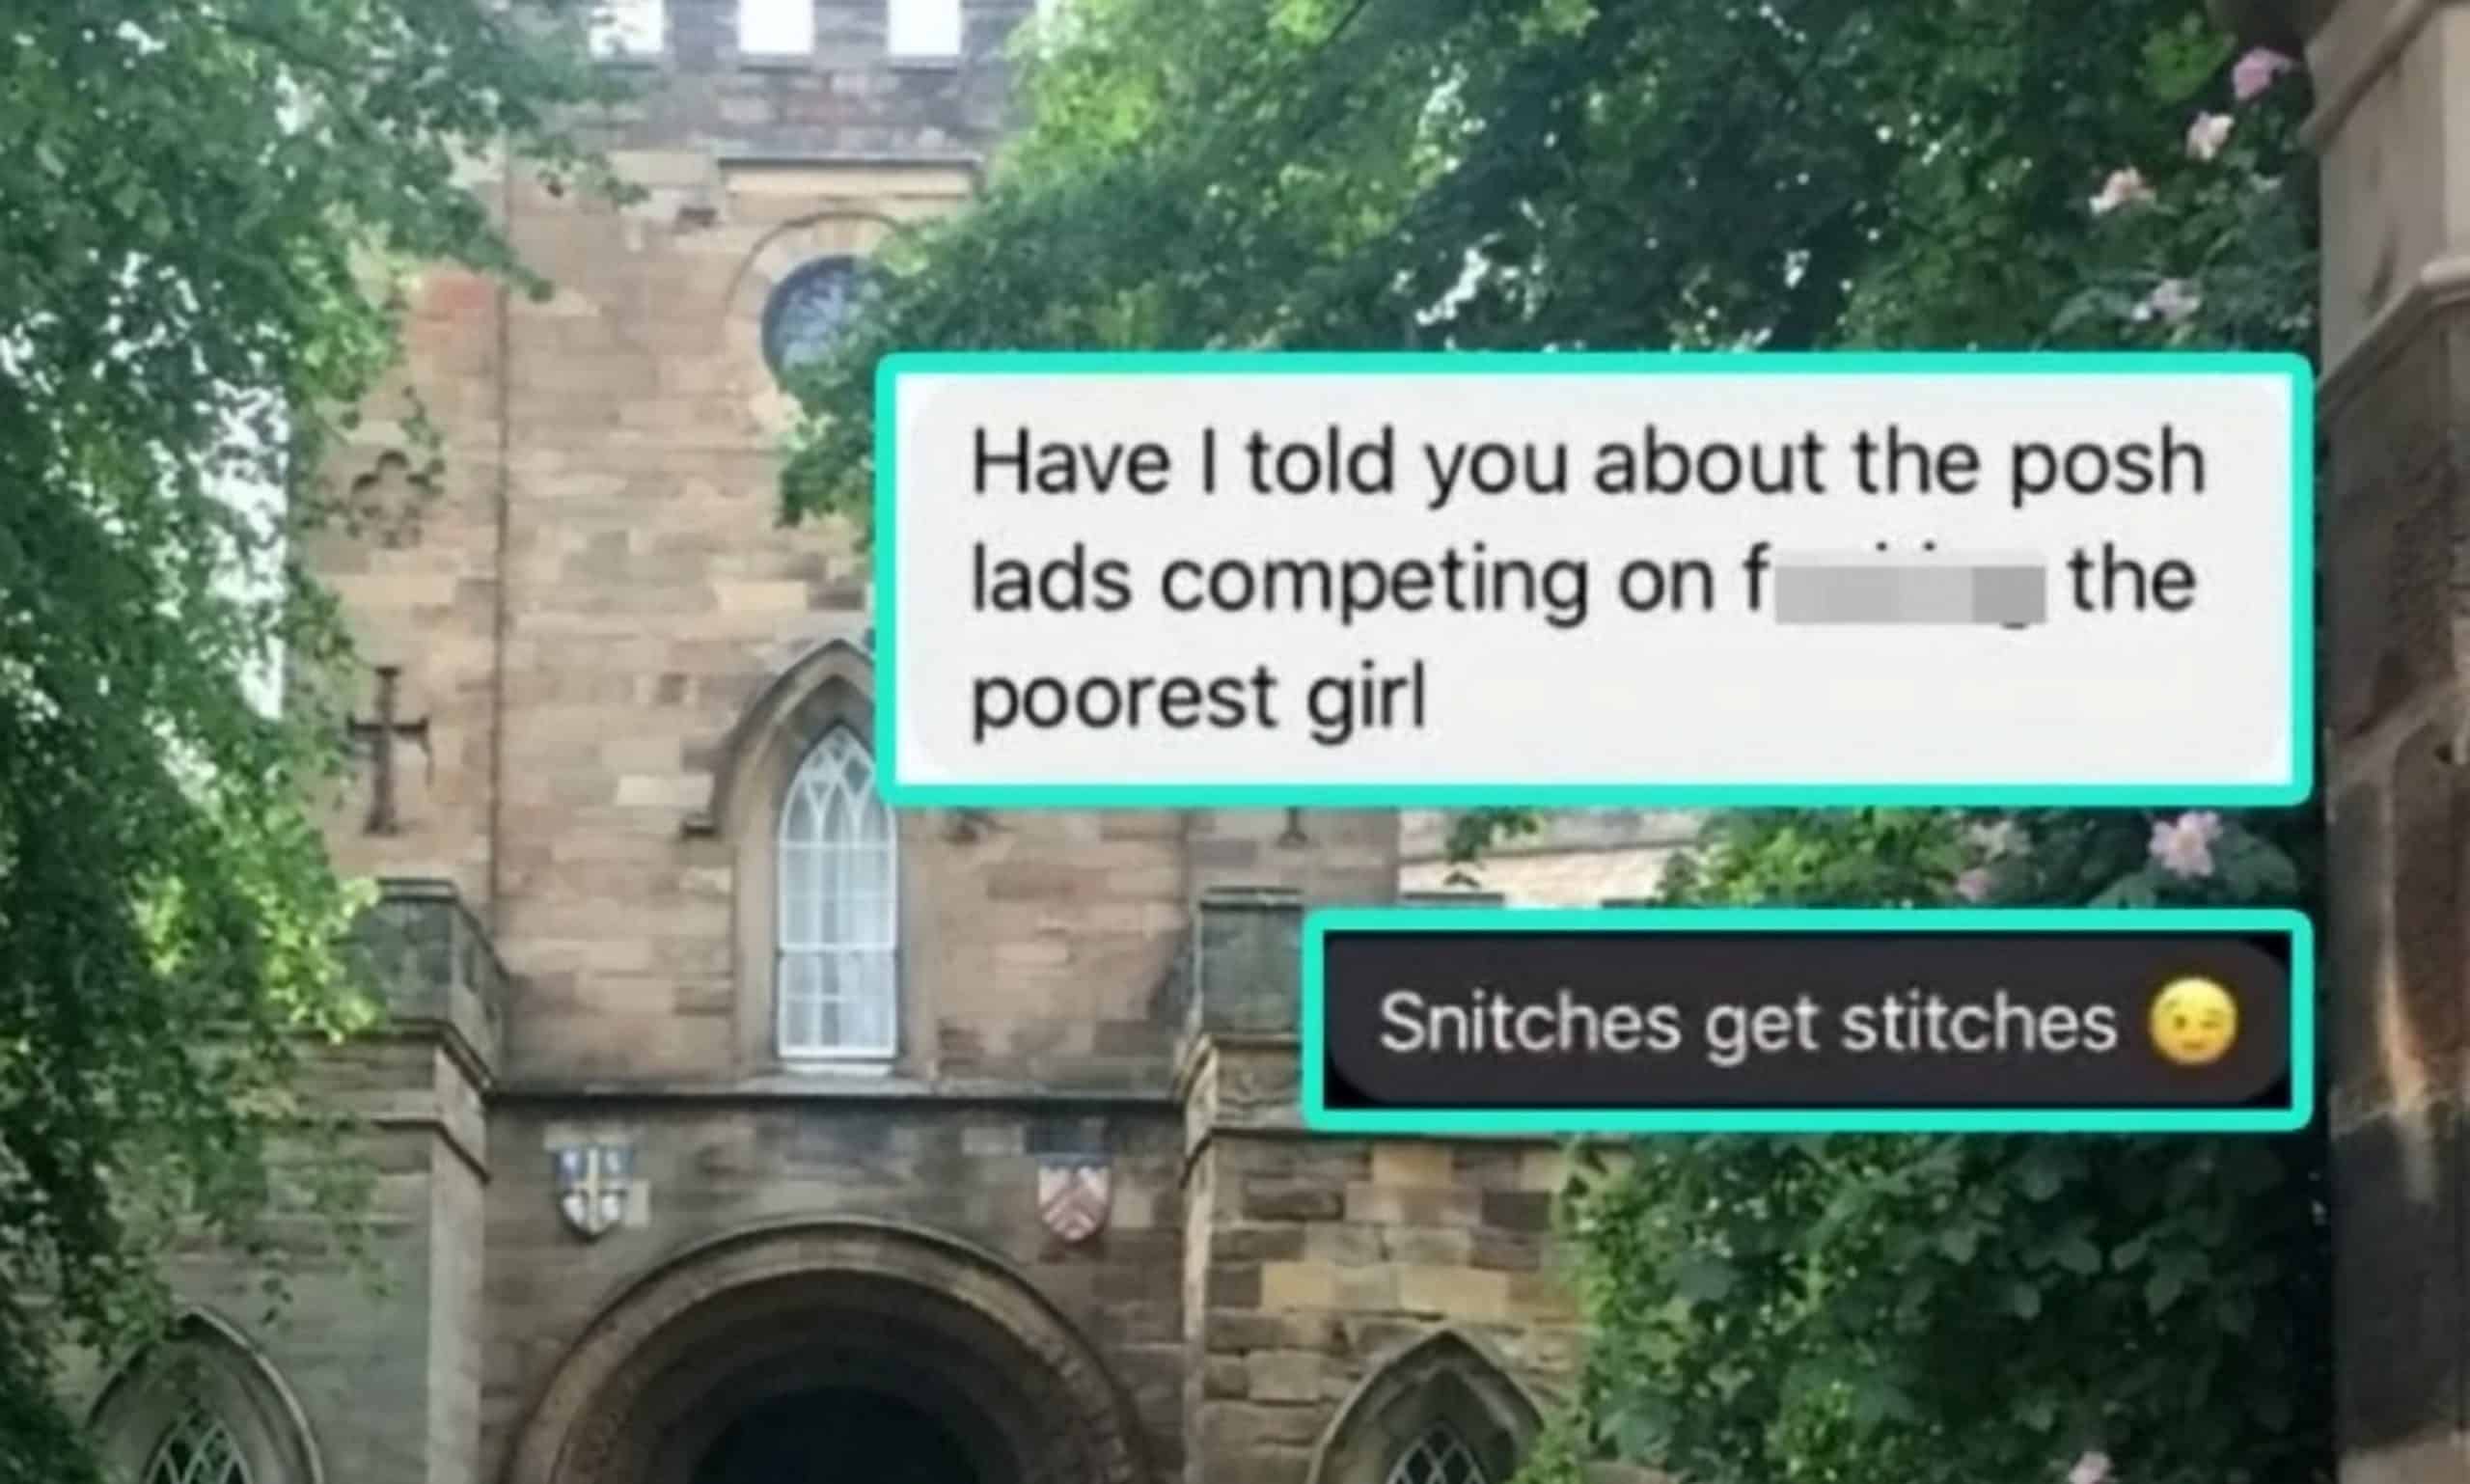 Durham Uni finally deals with student in ‘Posh Lad’ group discussing contest to sleep with ‘poorest girl’